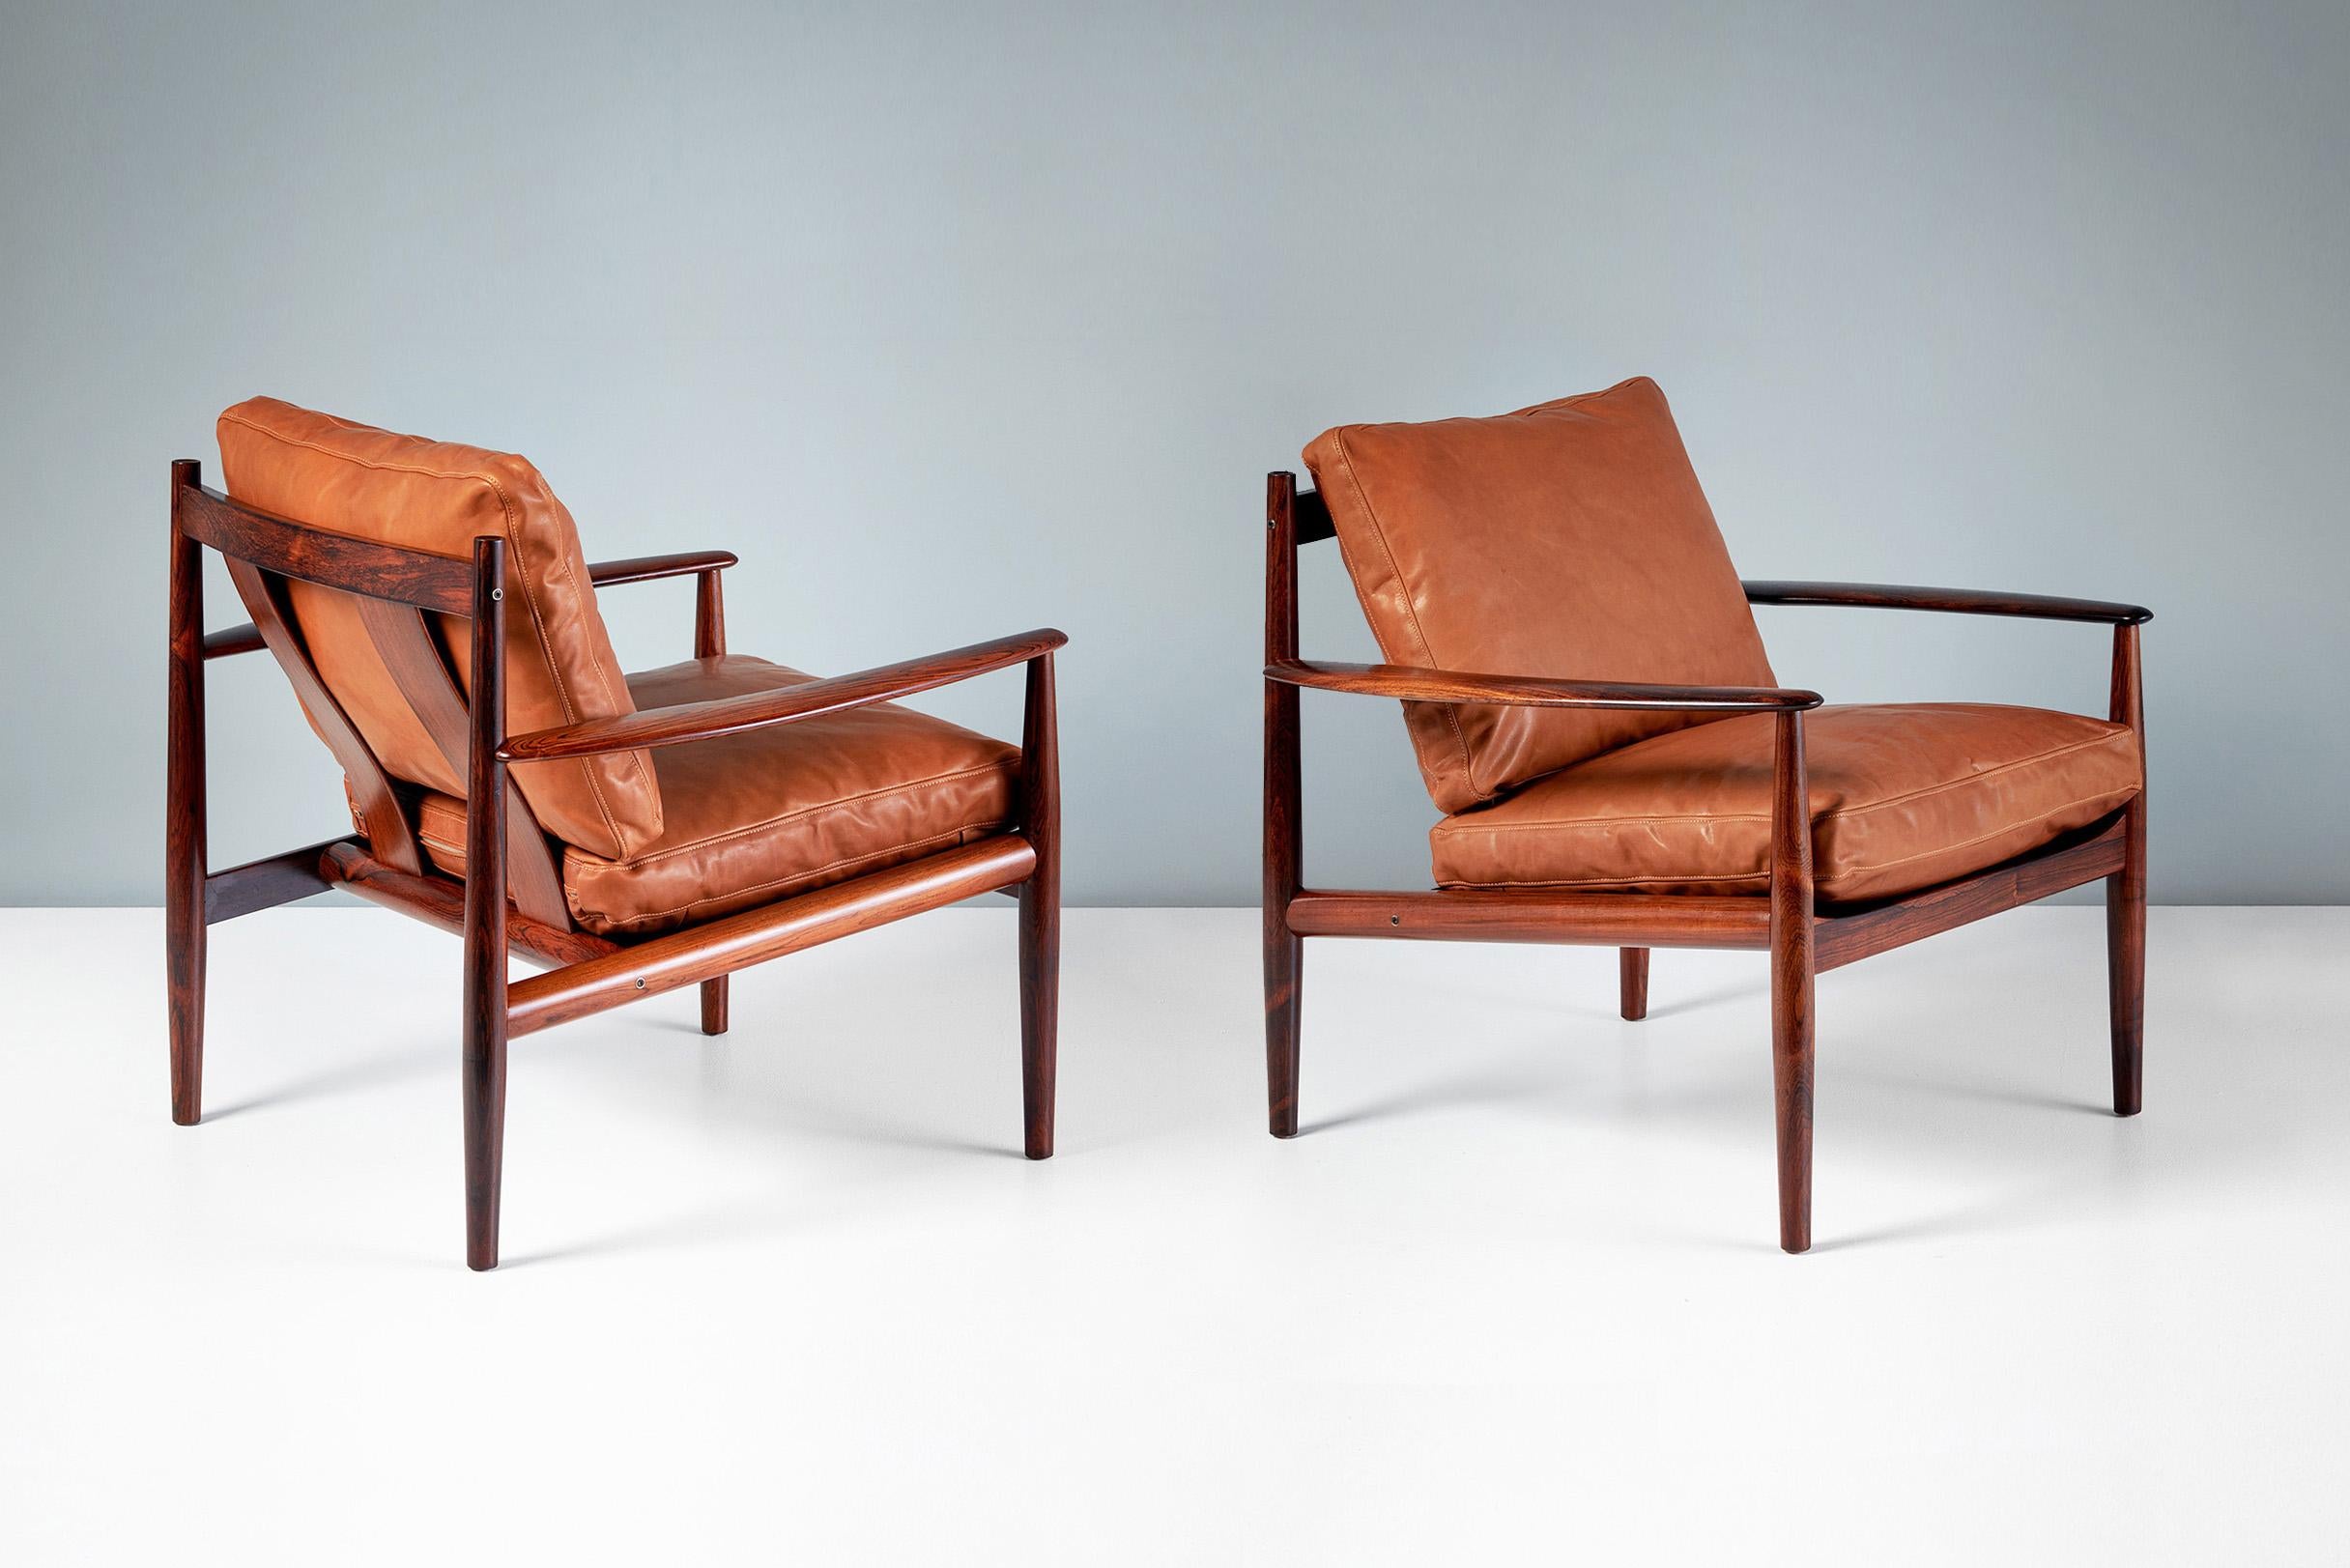 Grete Jalk - Pair of Model 128 Lounge Chairs, c1963

A pair of exquisite rosewood lounge chairs produced by France & Son, Denmark c1960s. The new feather cushions have been upholstered in premium, cognac brown aniline leather. Maker’s badge and